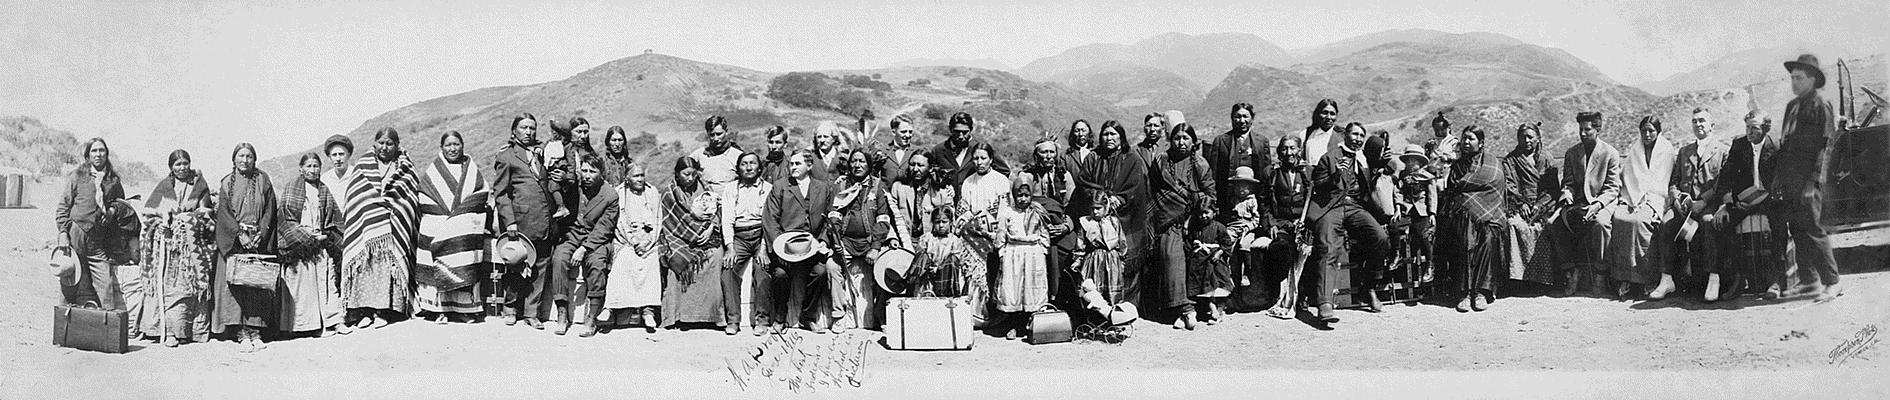 This black and white image depicts a gathering of roughly forty Native Americans gathered for a group photo in front of low mountains.